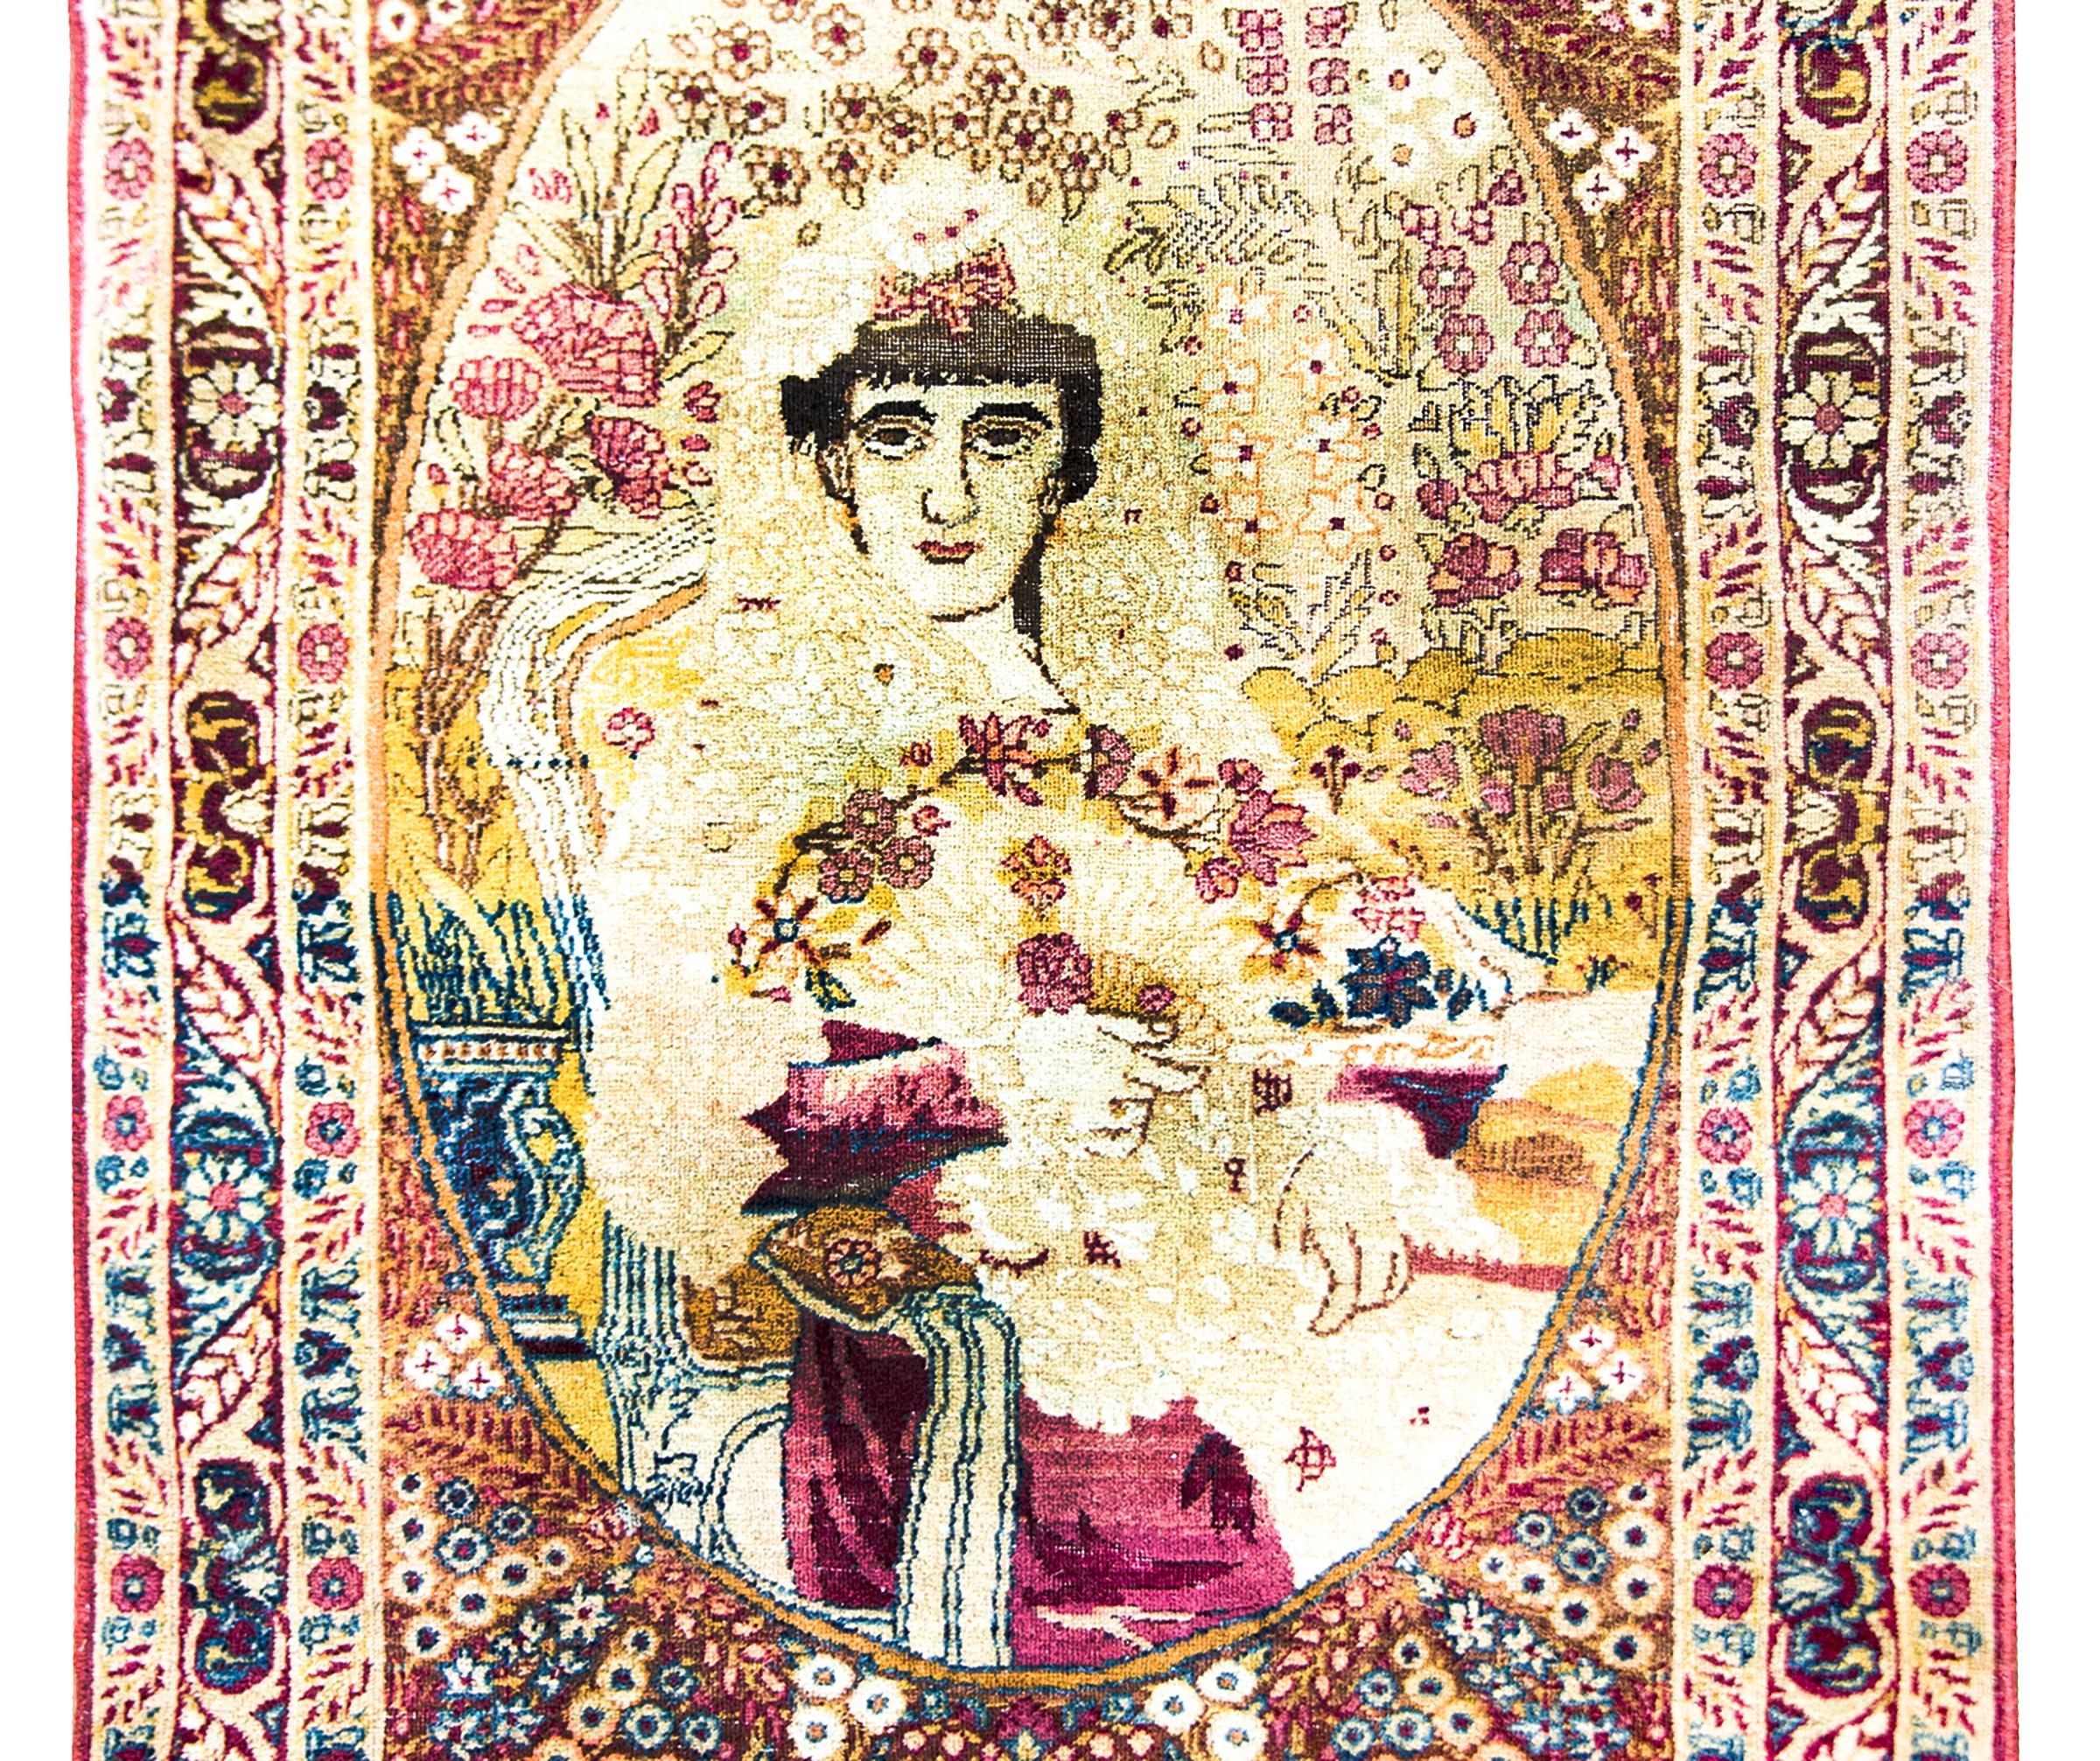 Early 20th Century Persian Pictorial Lavar Kirman rug depicting Taj al-Saltaneh (1884 – January 25, 1936) who was a princess of the Qajar dynasty.  She was a writer, a painter, an intellectual, and an activist who hosted literary salons at her house